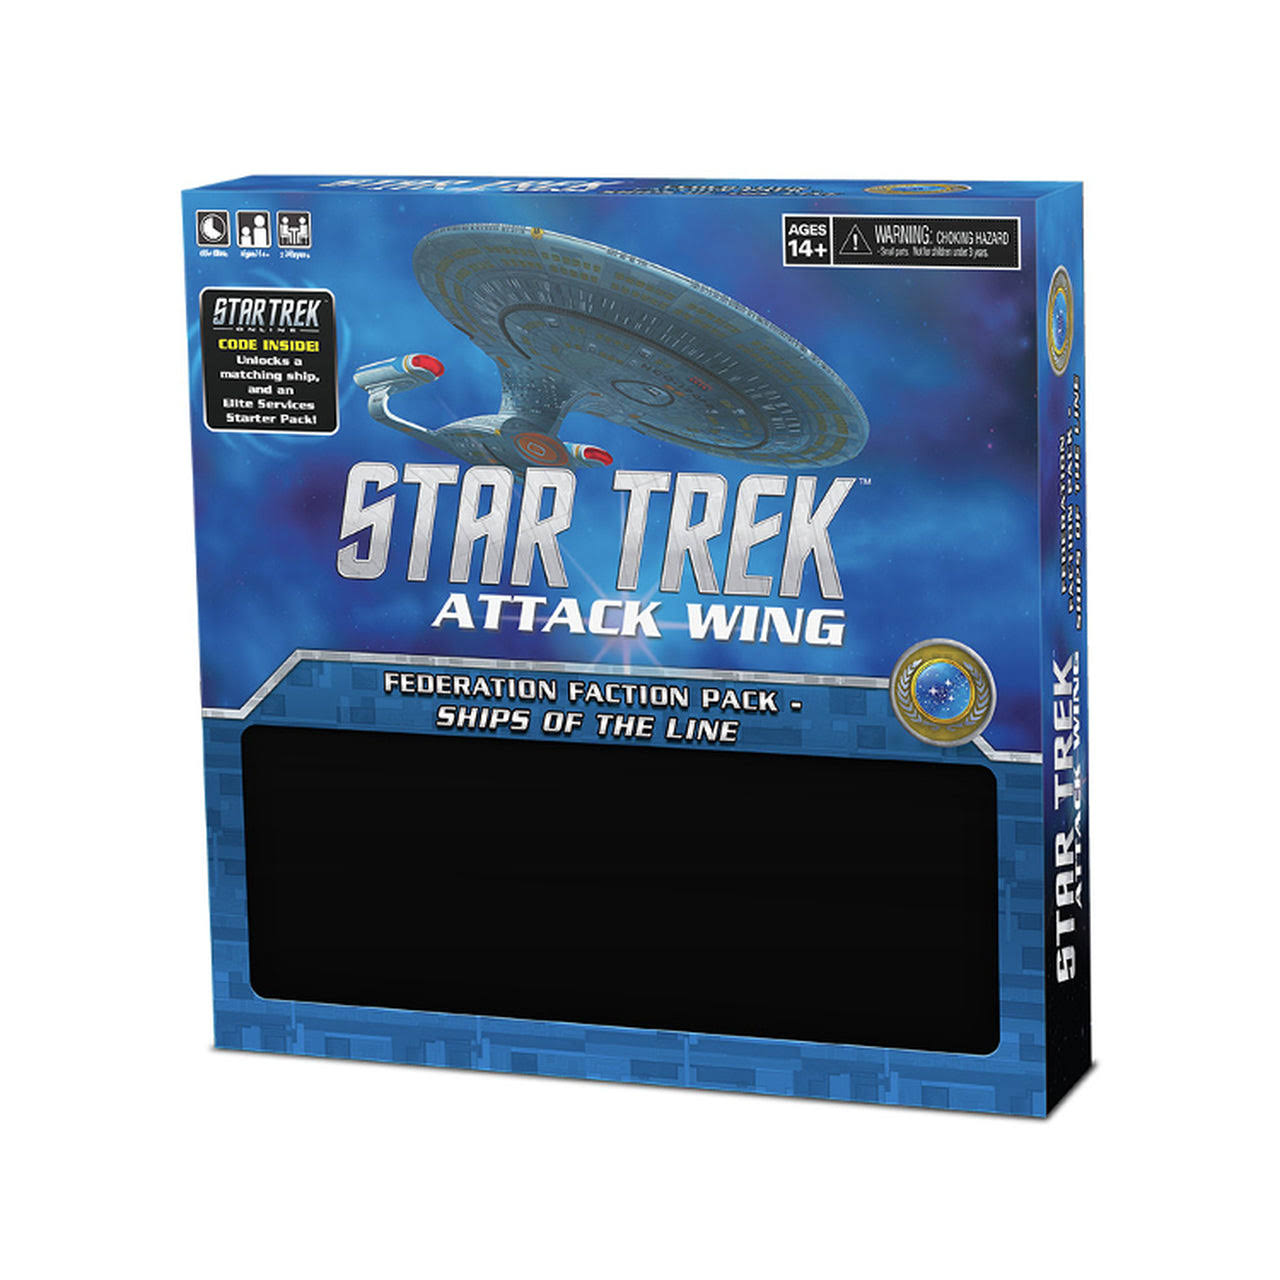 Star Trek: Attack Wing: Federation Faction Pack - Ships of the Line